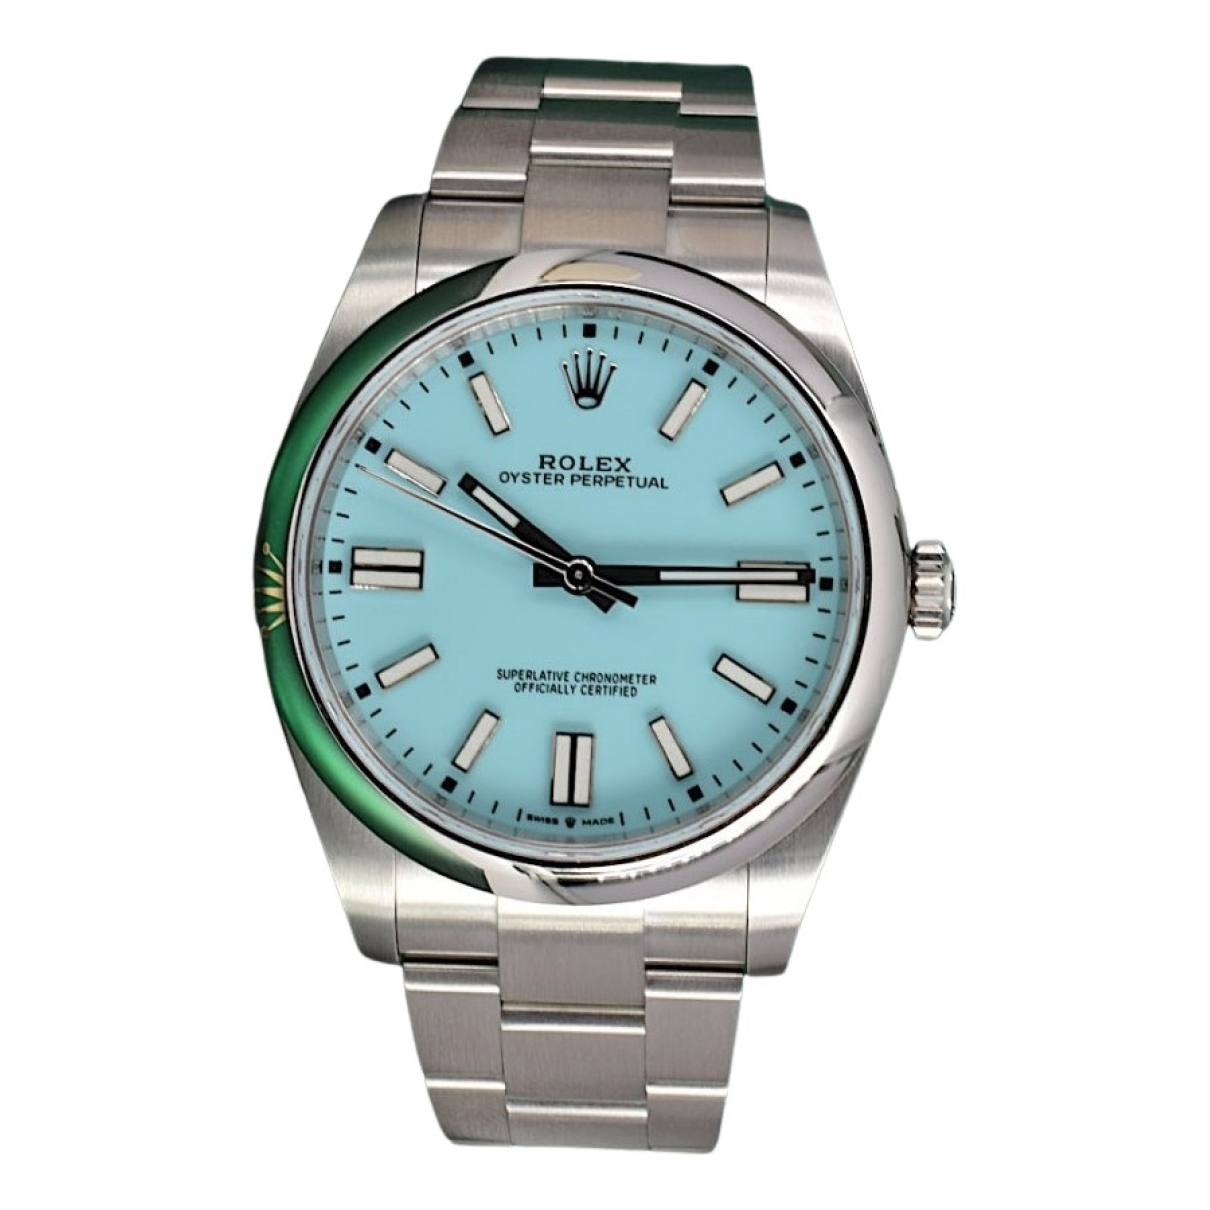 image of Rolex Oyster Perpetual watch